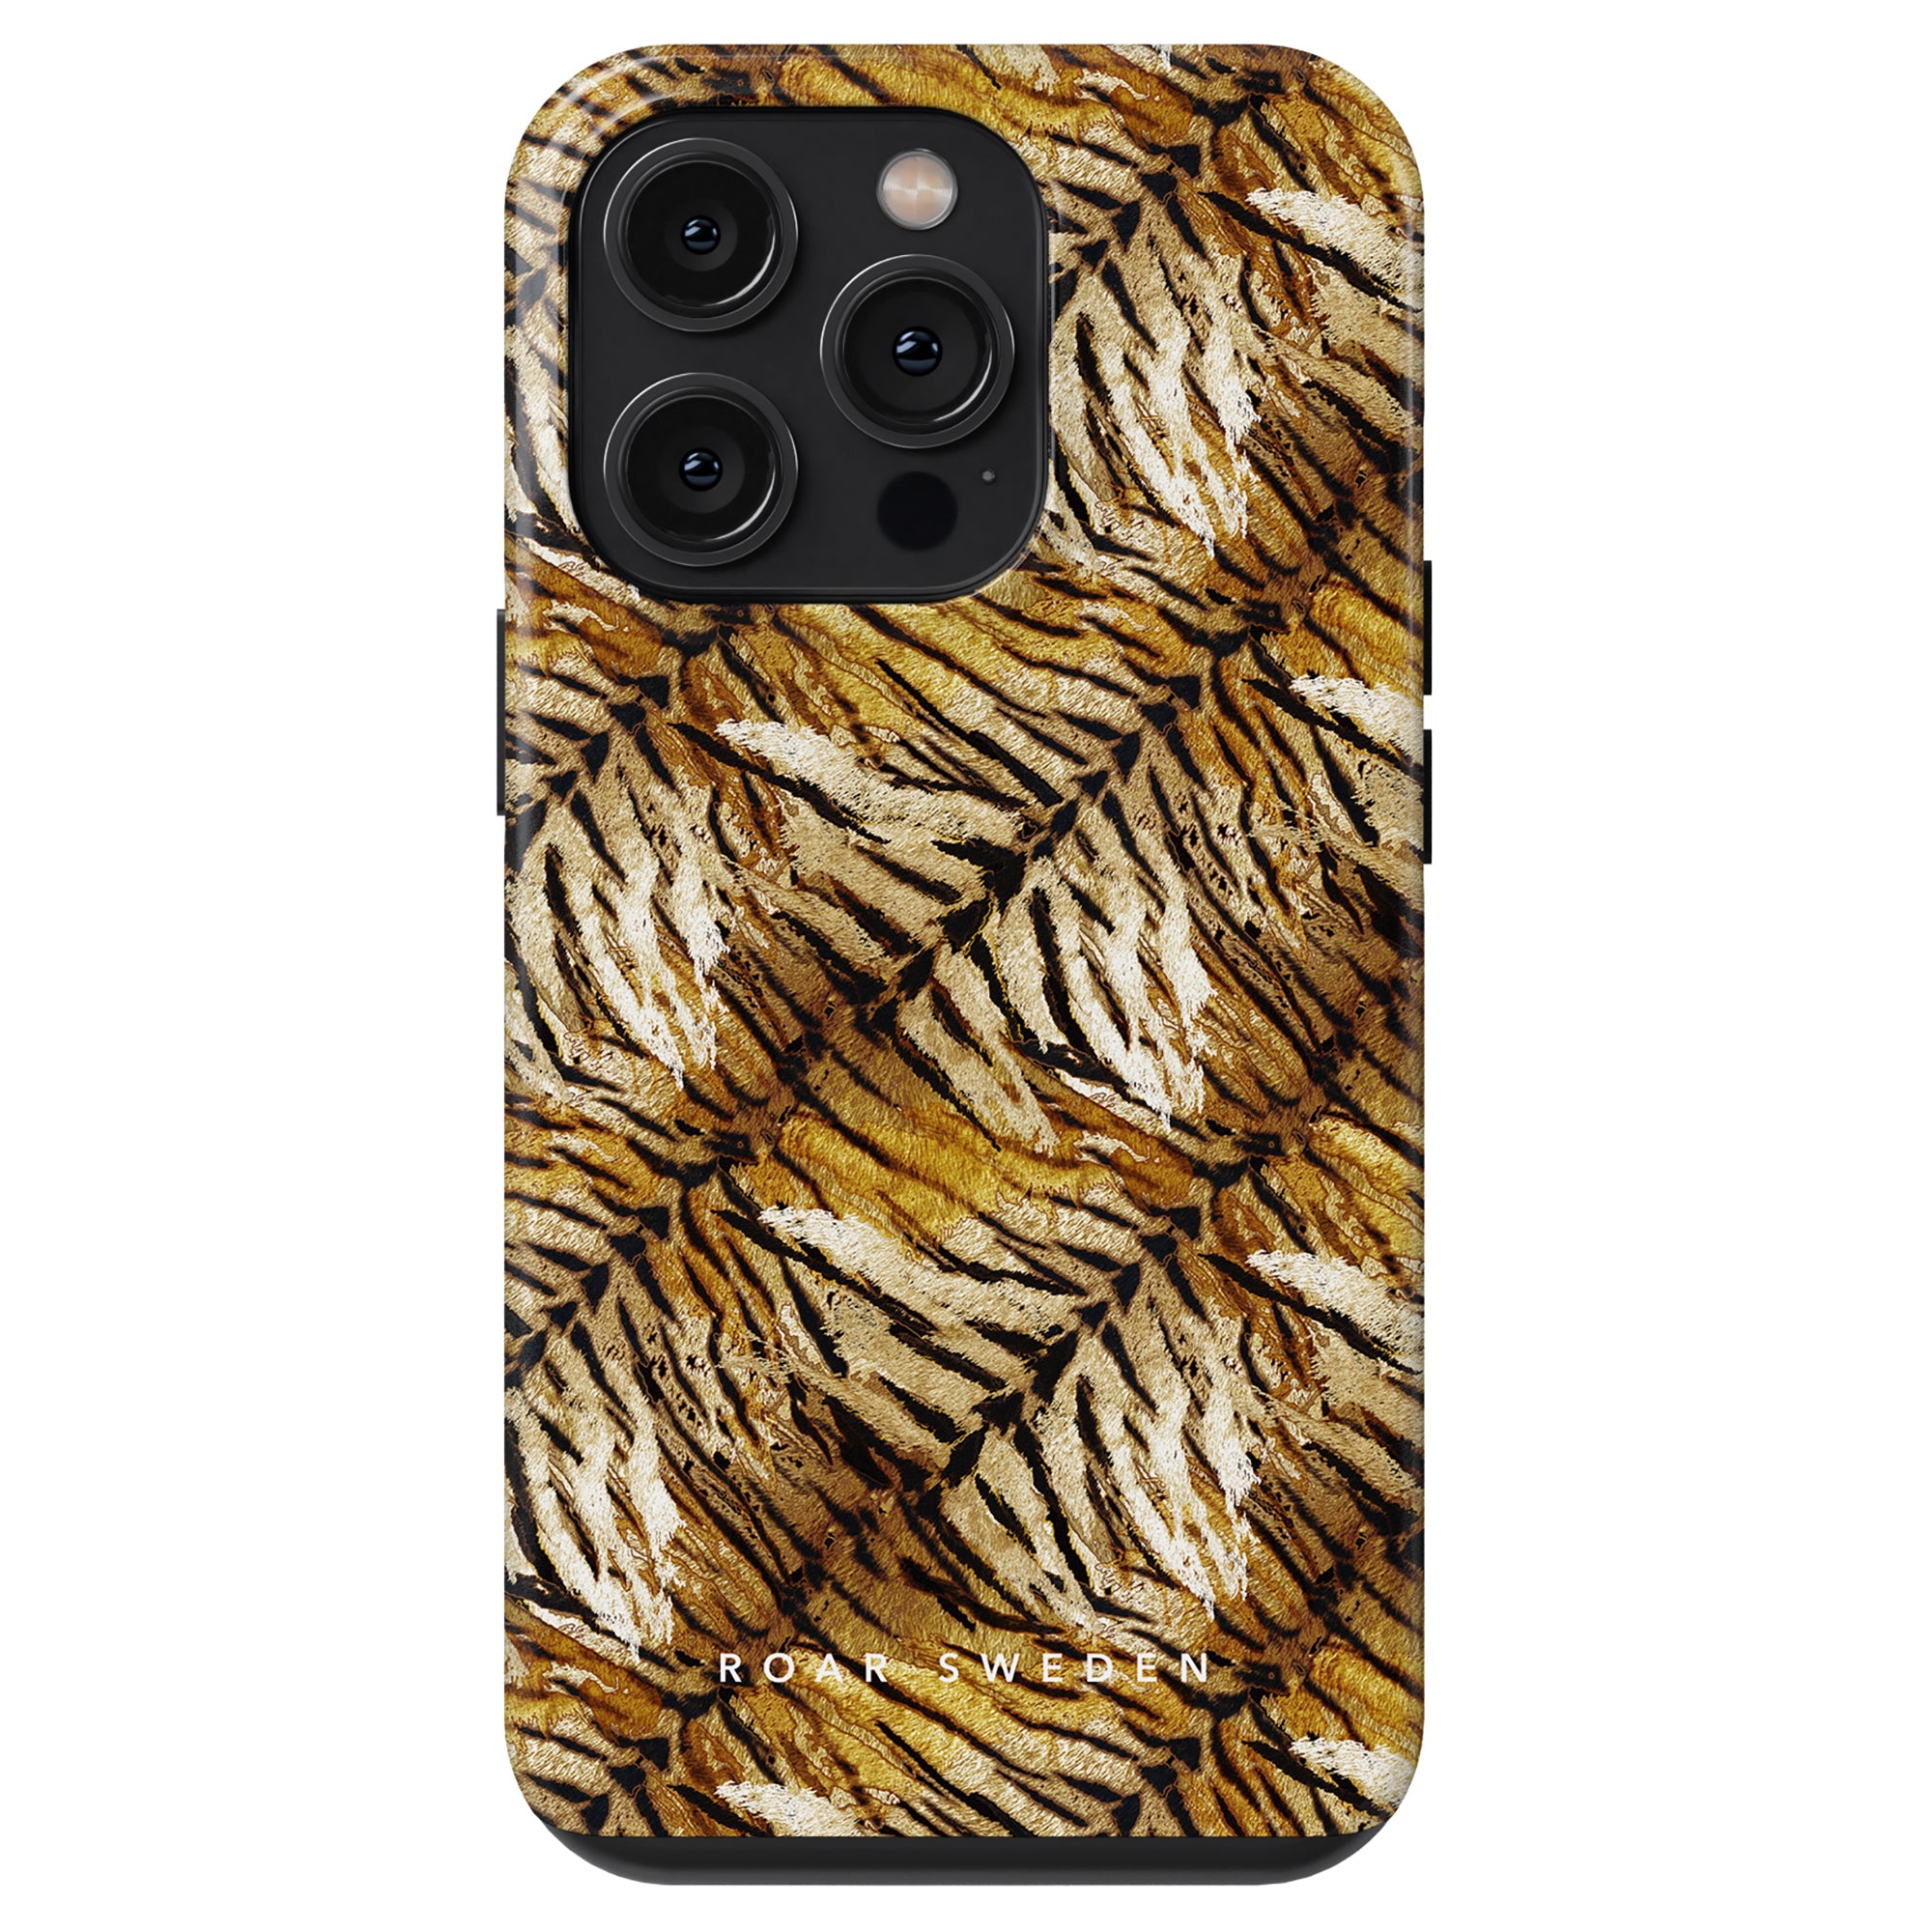 Introducing our stylish Bengal - Tough Case, exclusively designed for the iPhone 11. This trendy accessory combines fashion and protection to give your device a fierce and captivating look. Elevate your style with Bengal - Tough Case.